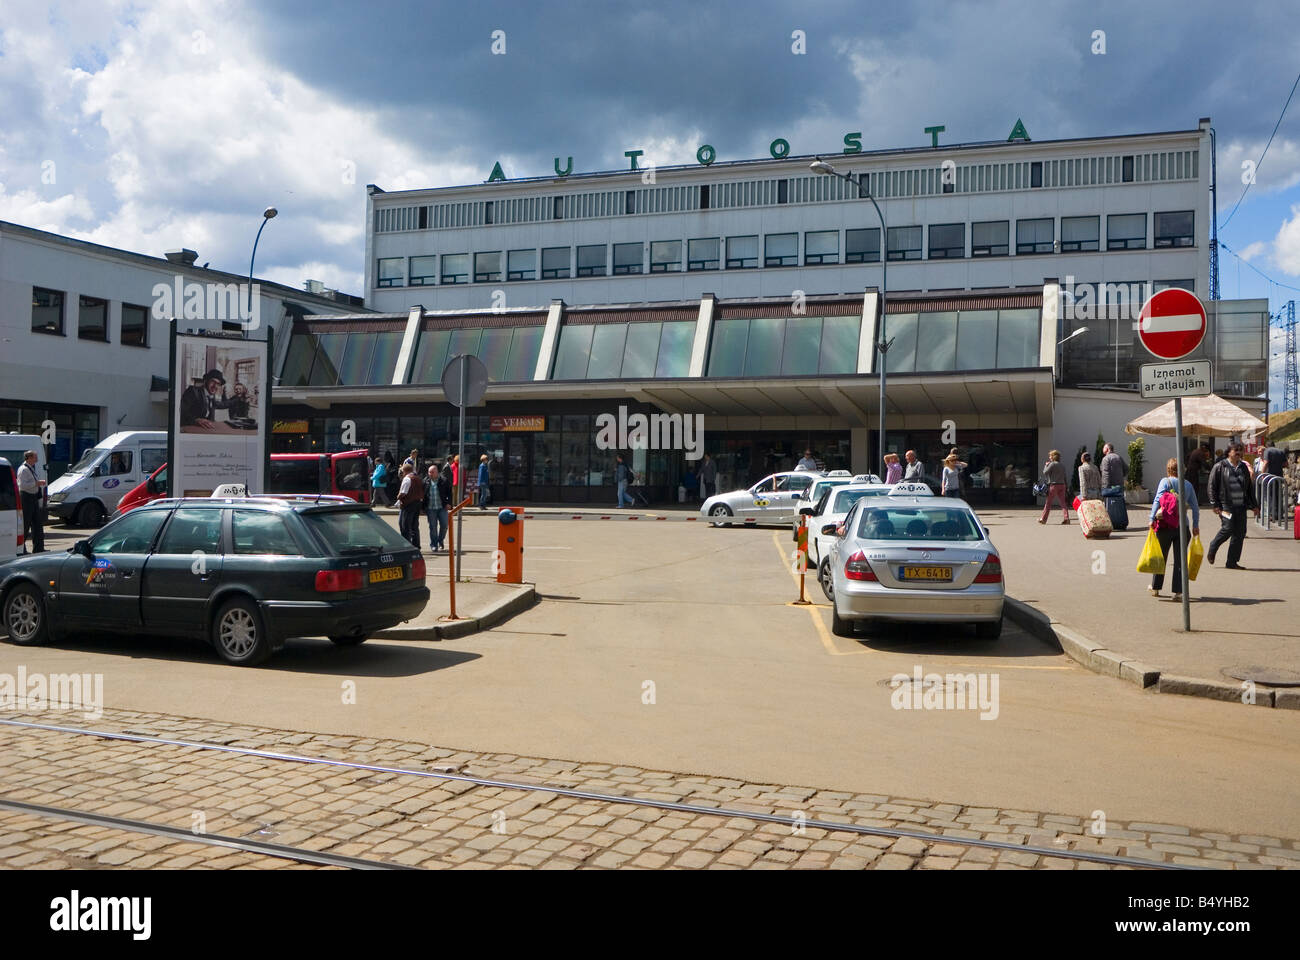 Bus Riga Latvia High Resolution Stock Photography and Images - Alamy